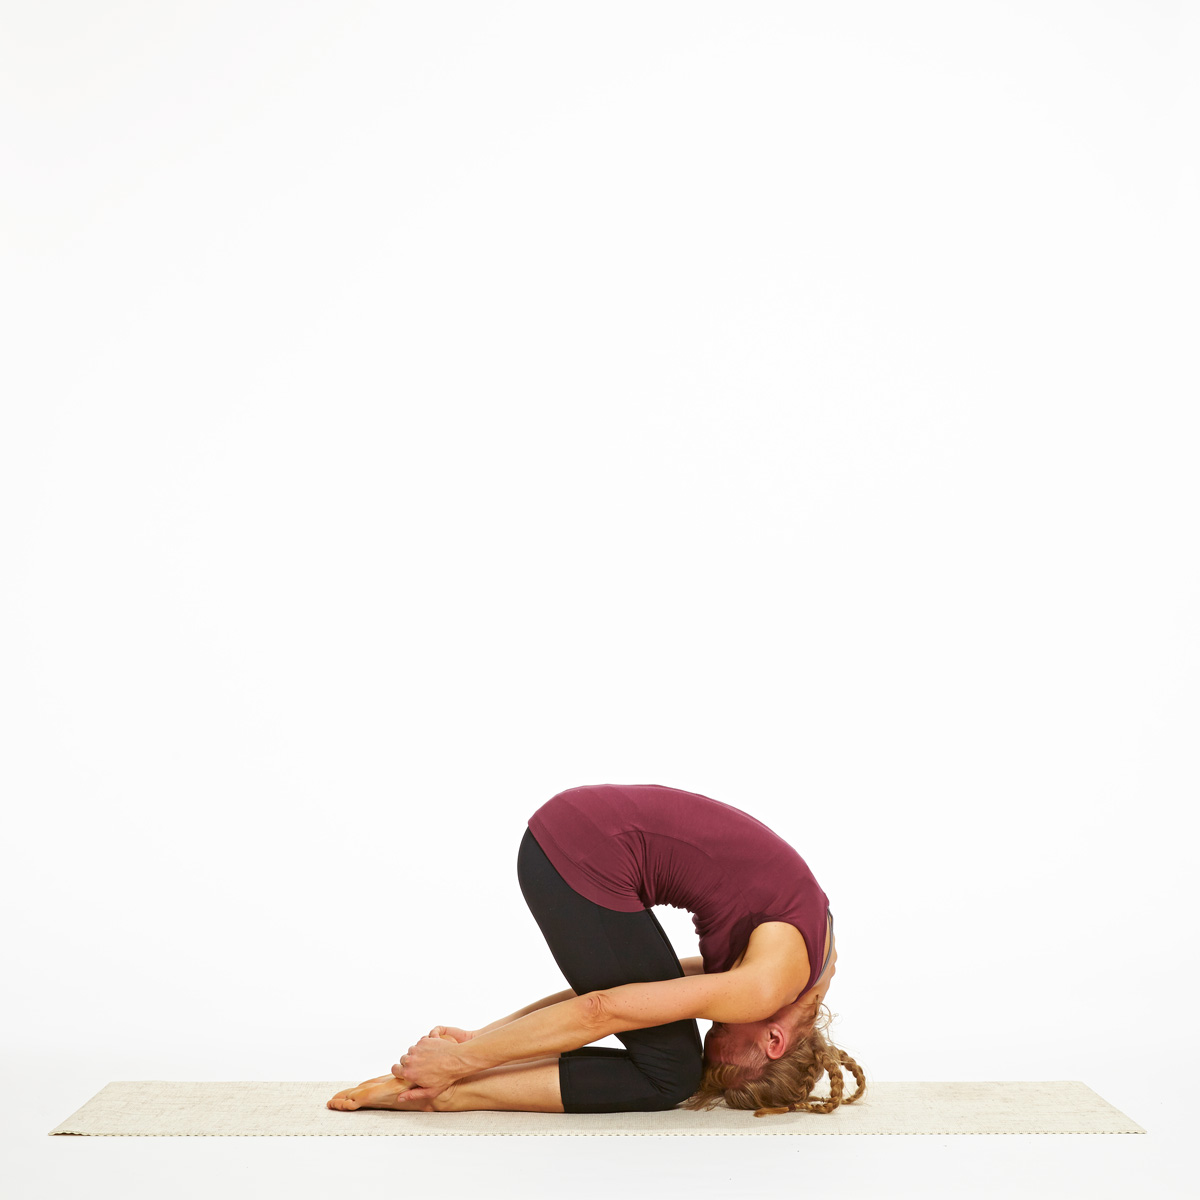 YOG Swasthya - yoga center - Shashankasana (Rabbit Pose) is A Hatha Yoga  posture, It is a wonderful setting forwards bending position. When this  asana is performed to relieve stress from the